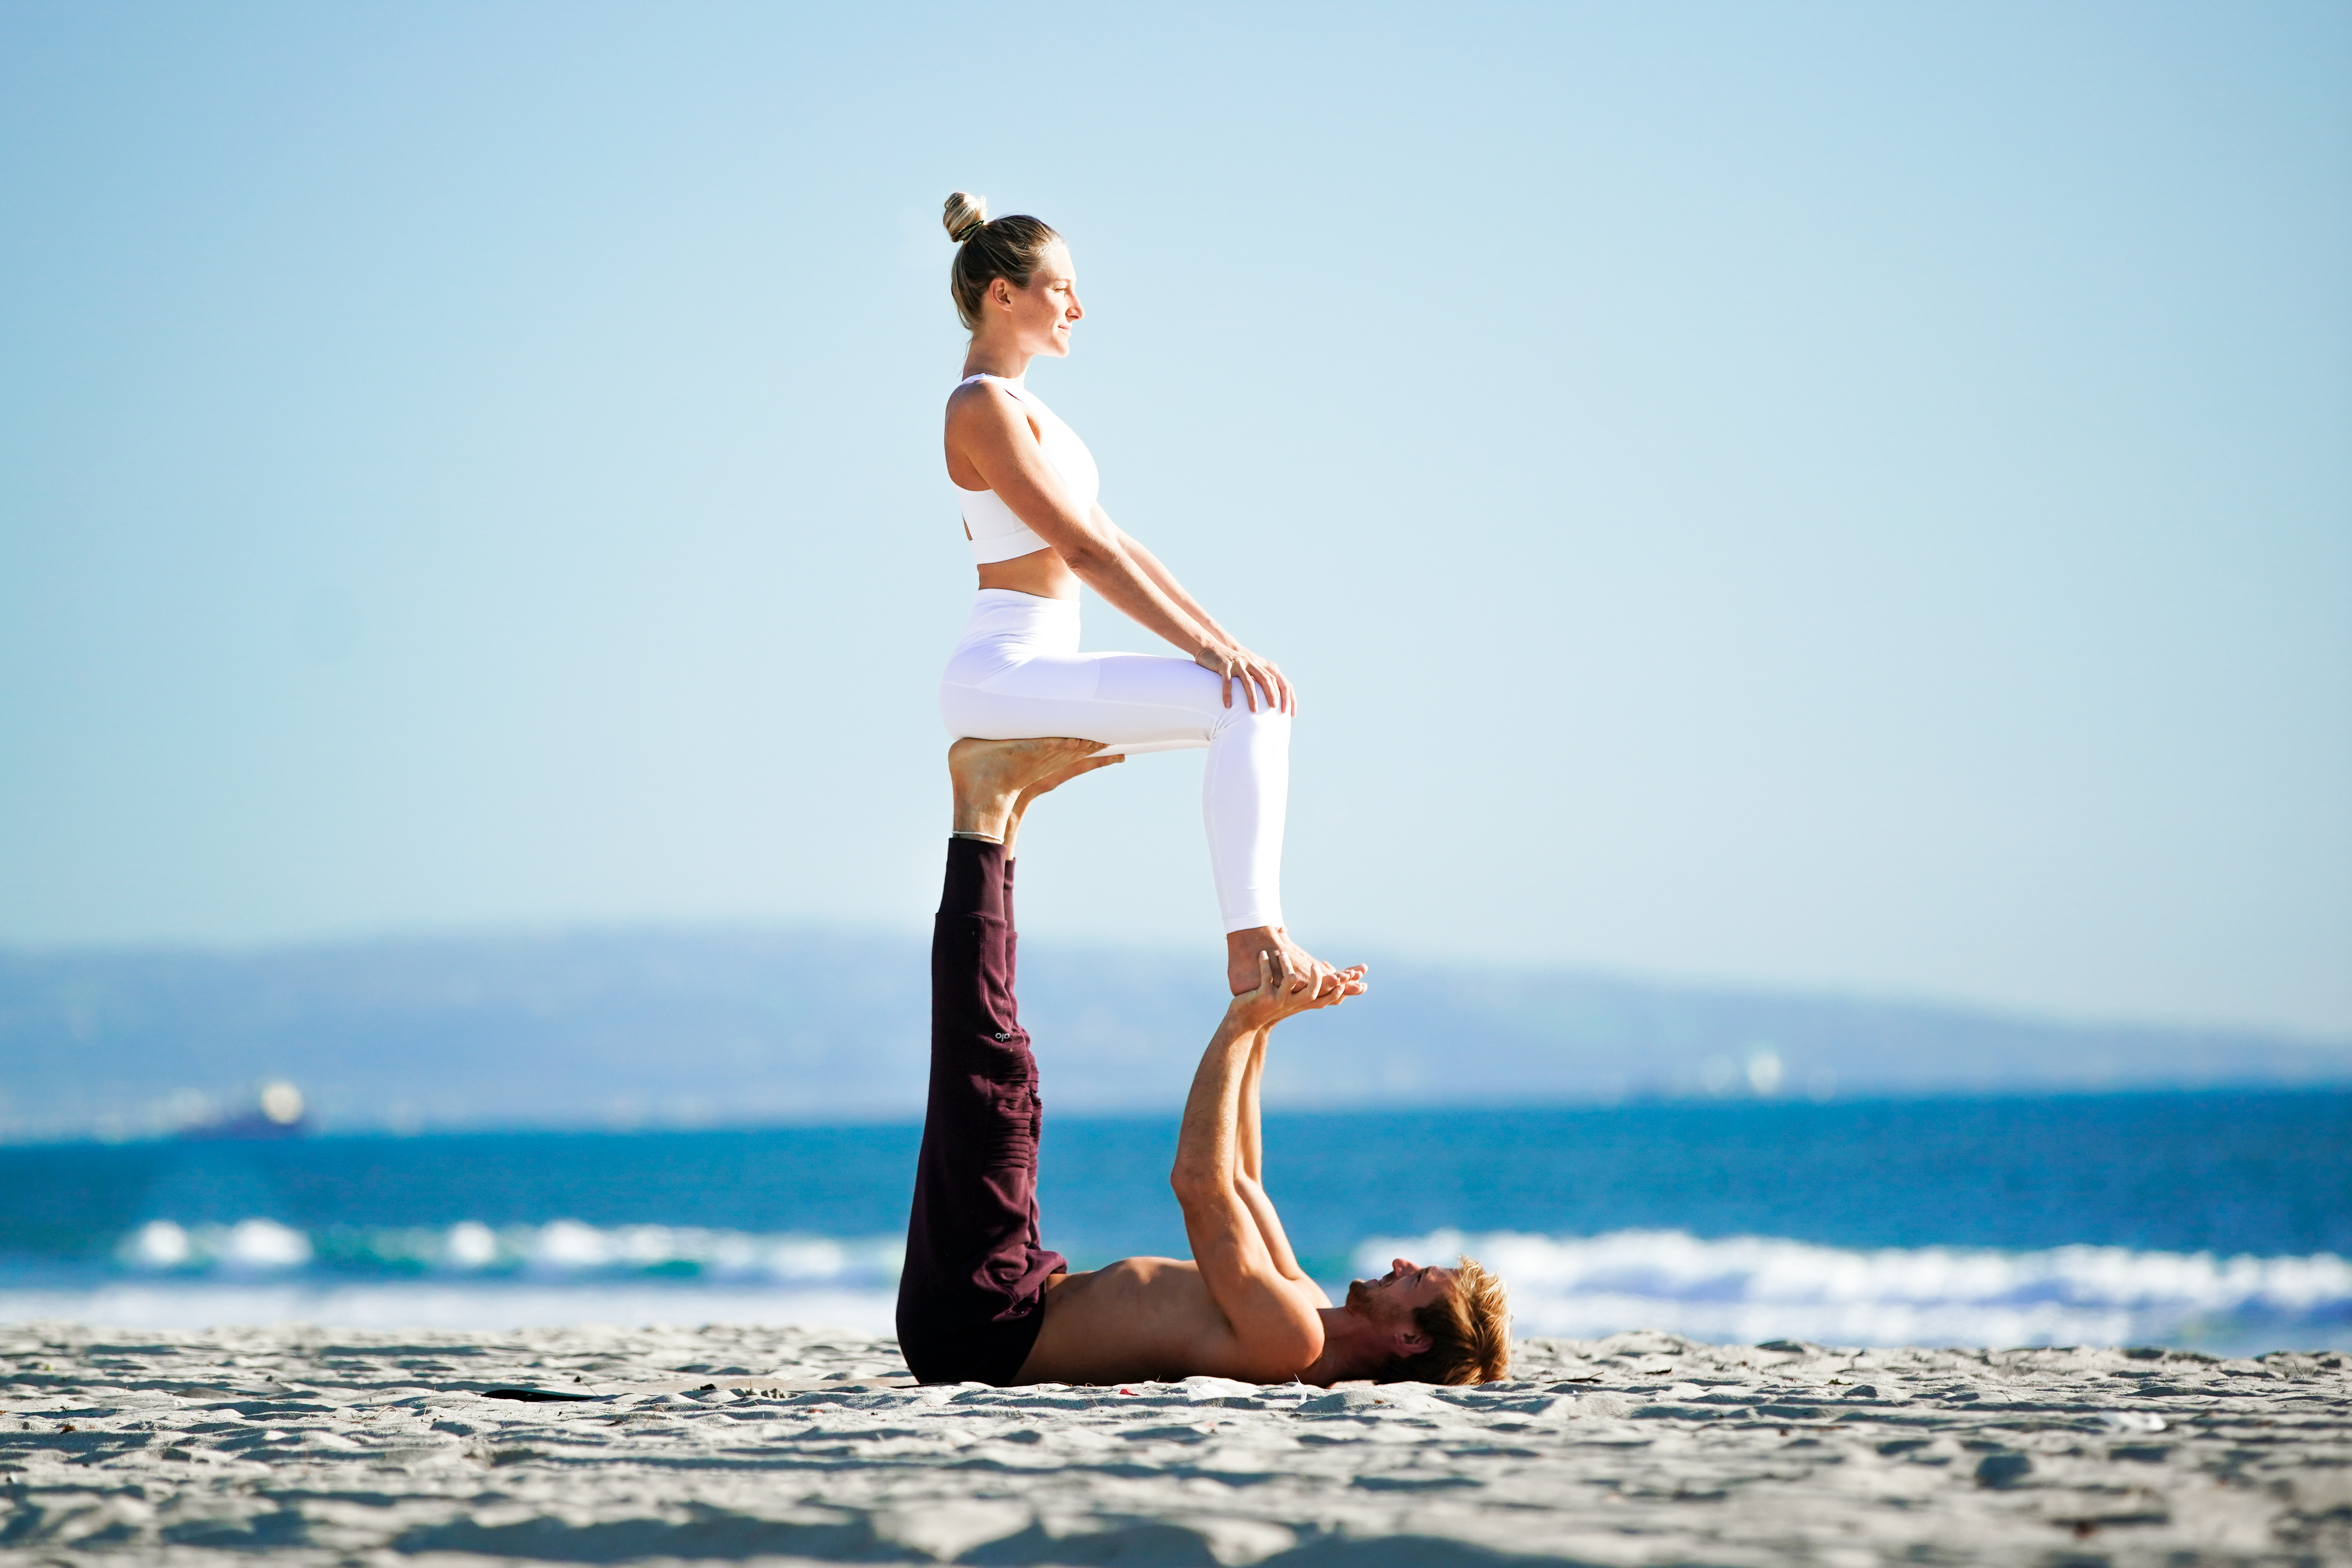 Try These 7 Partner Yoga Poses for Two - Goodnet